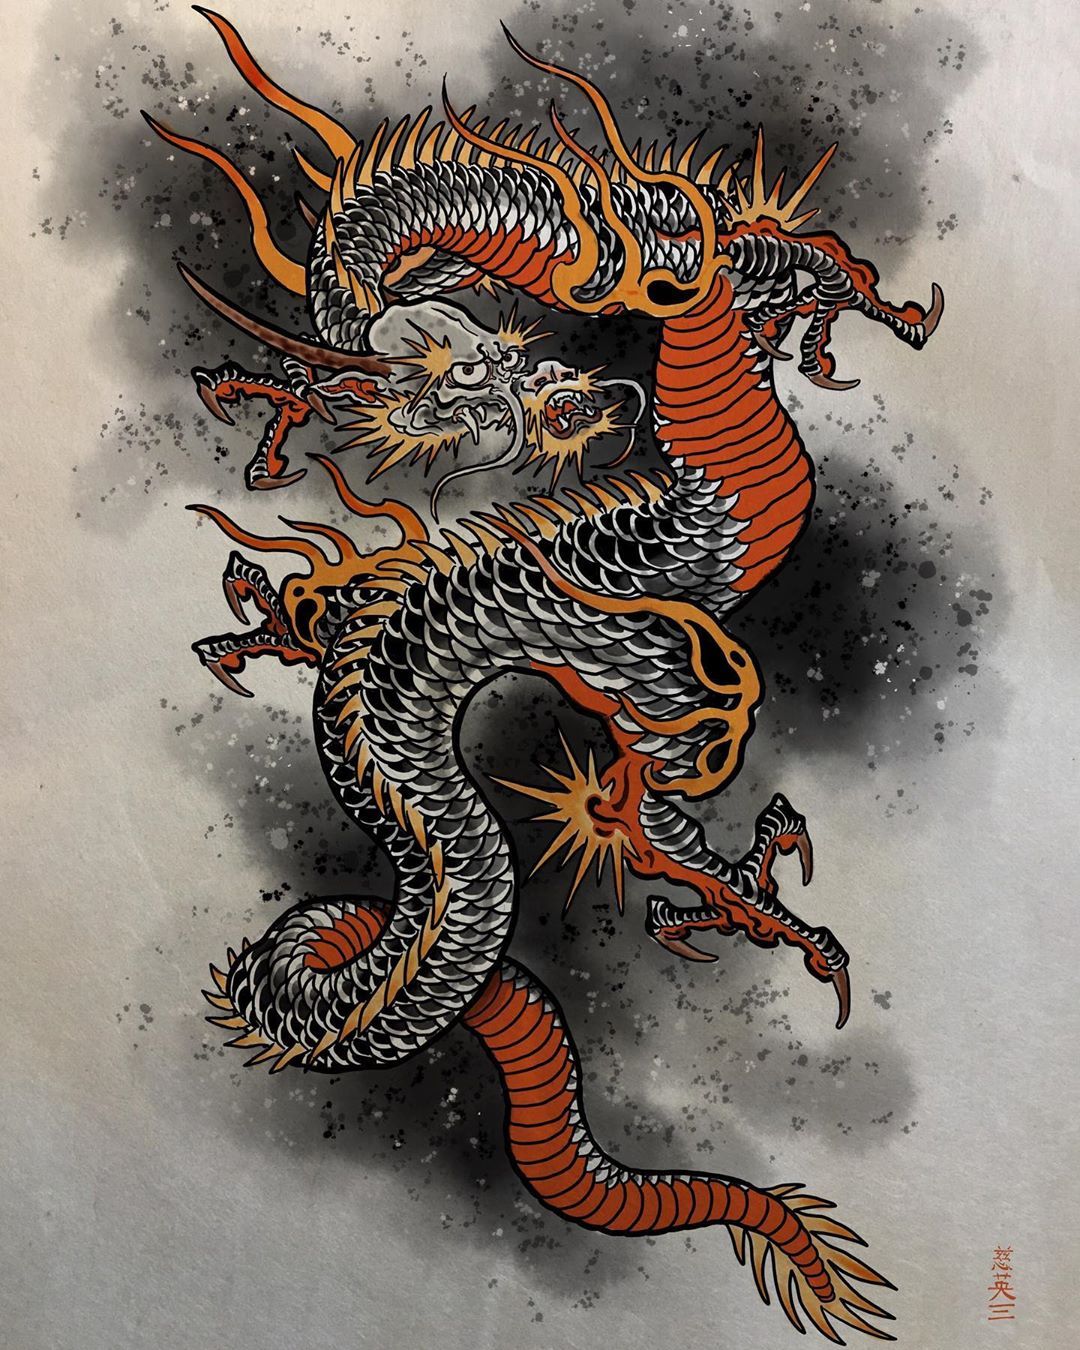 Ninjamie on Instagram: “Dragon in clouds. Would love to tattoo this #dragon #dragontattoo #japanesetatt. Japanese dragon tattoos, Dragon tattoo art, Dragon tattoo